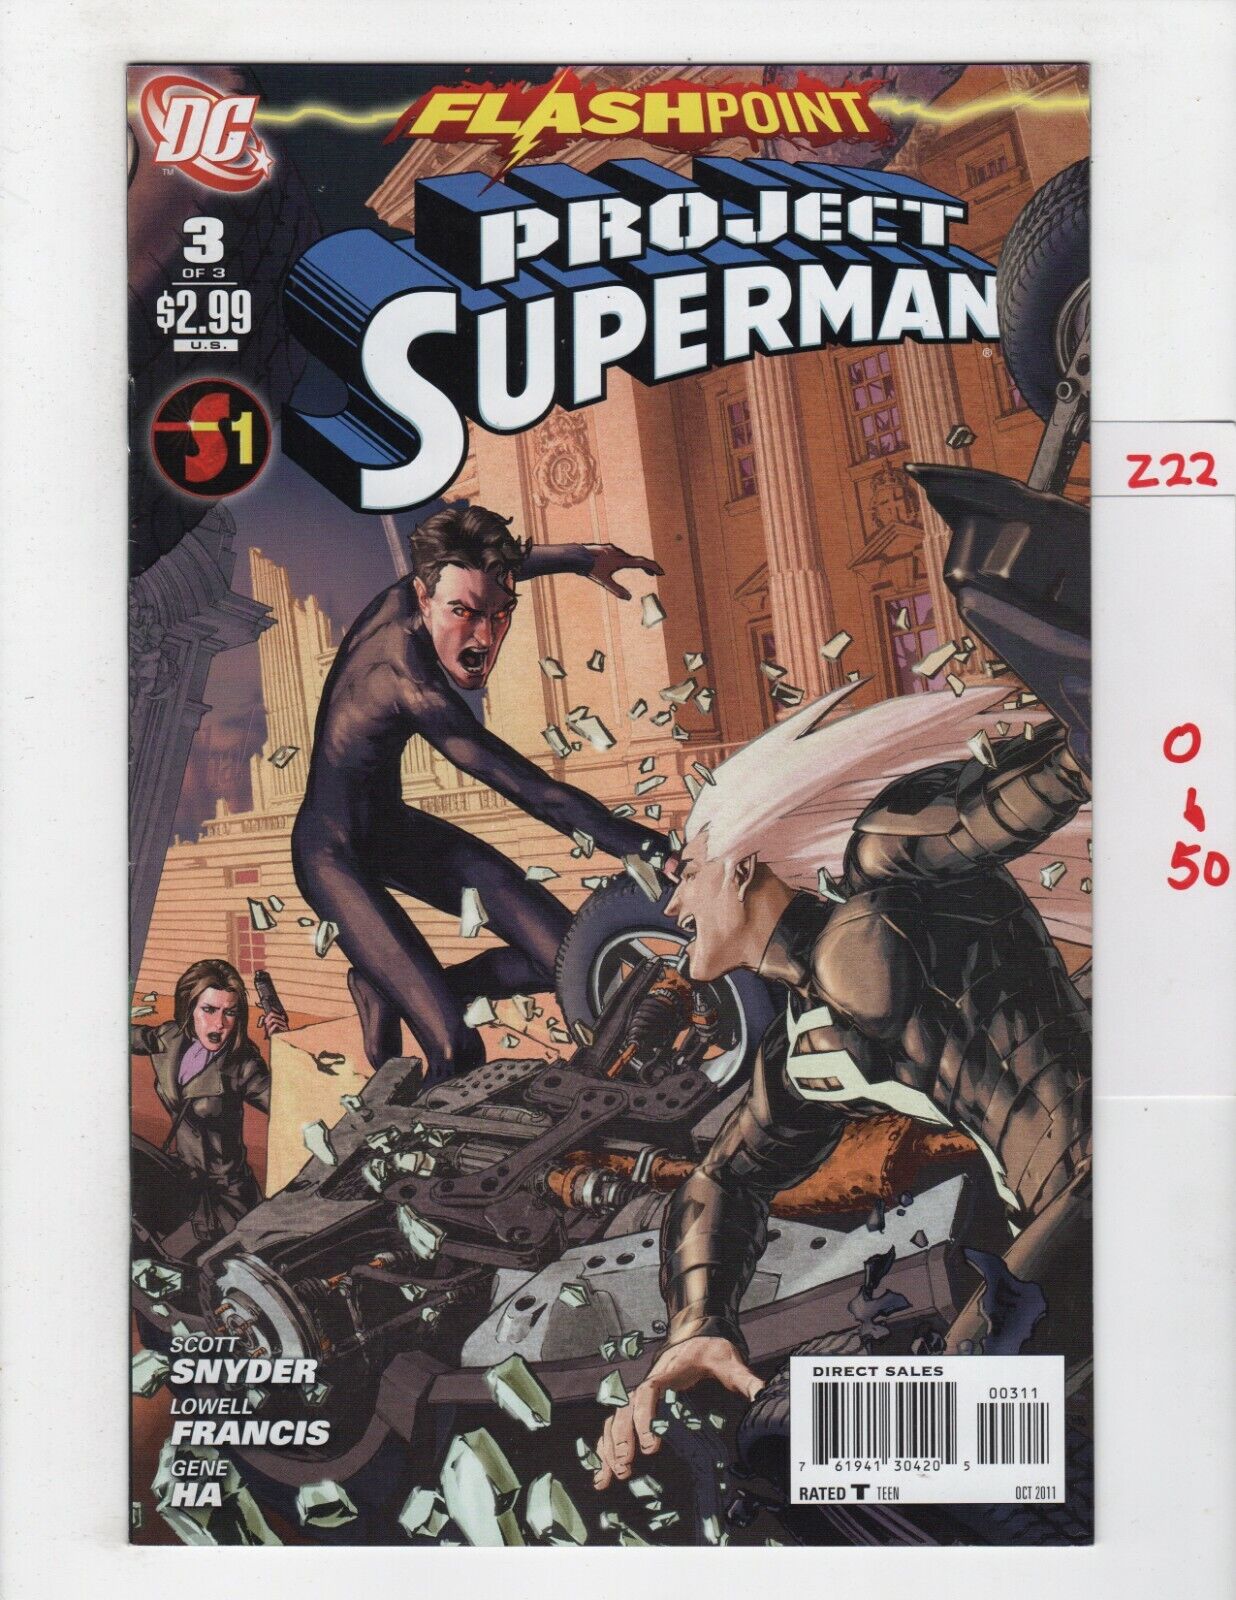 Flashpoint Project Superman #3 VF/NM 2011 DC z22050